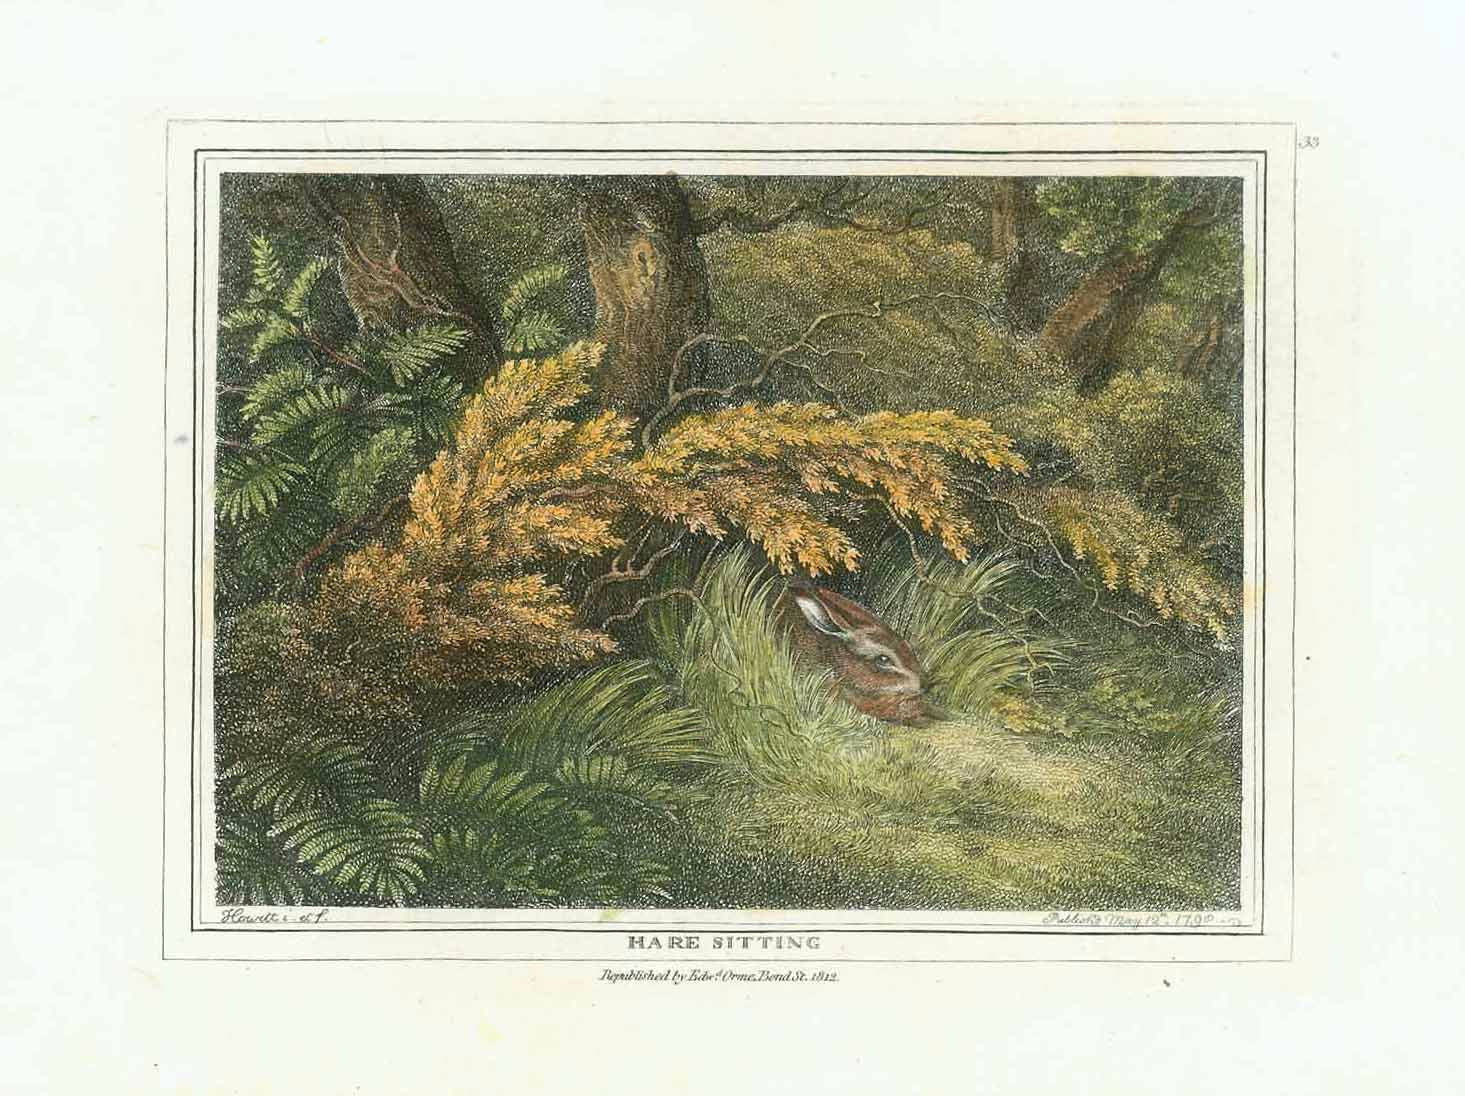 "Hare sitting"  Hand-colored stipple copper engraving by Samuel Howitt (1756-1822)  A cute hare hiding at the edge of forest  Published in London, dated 1799